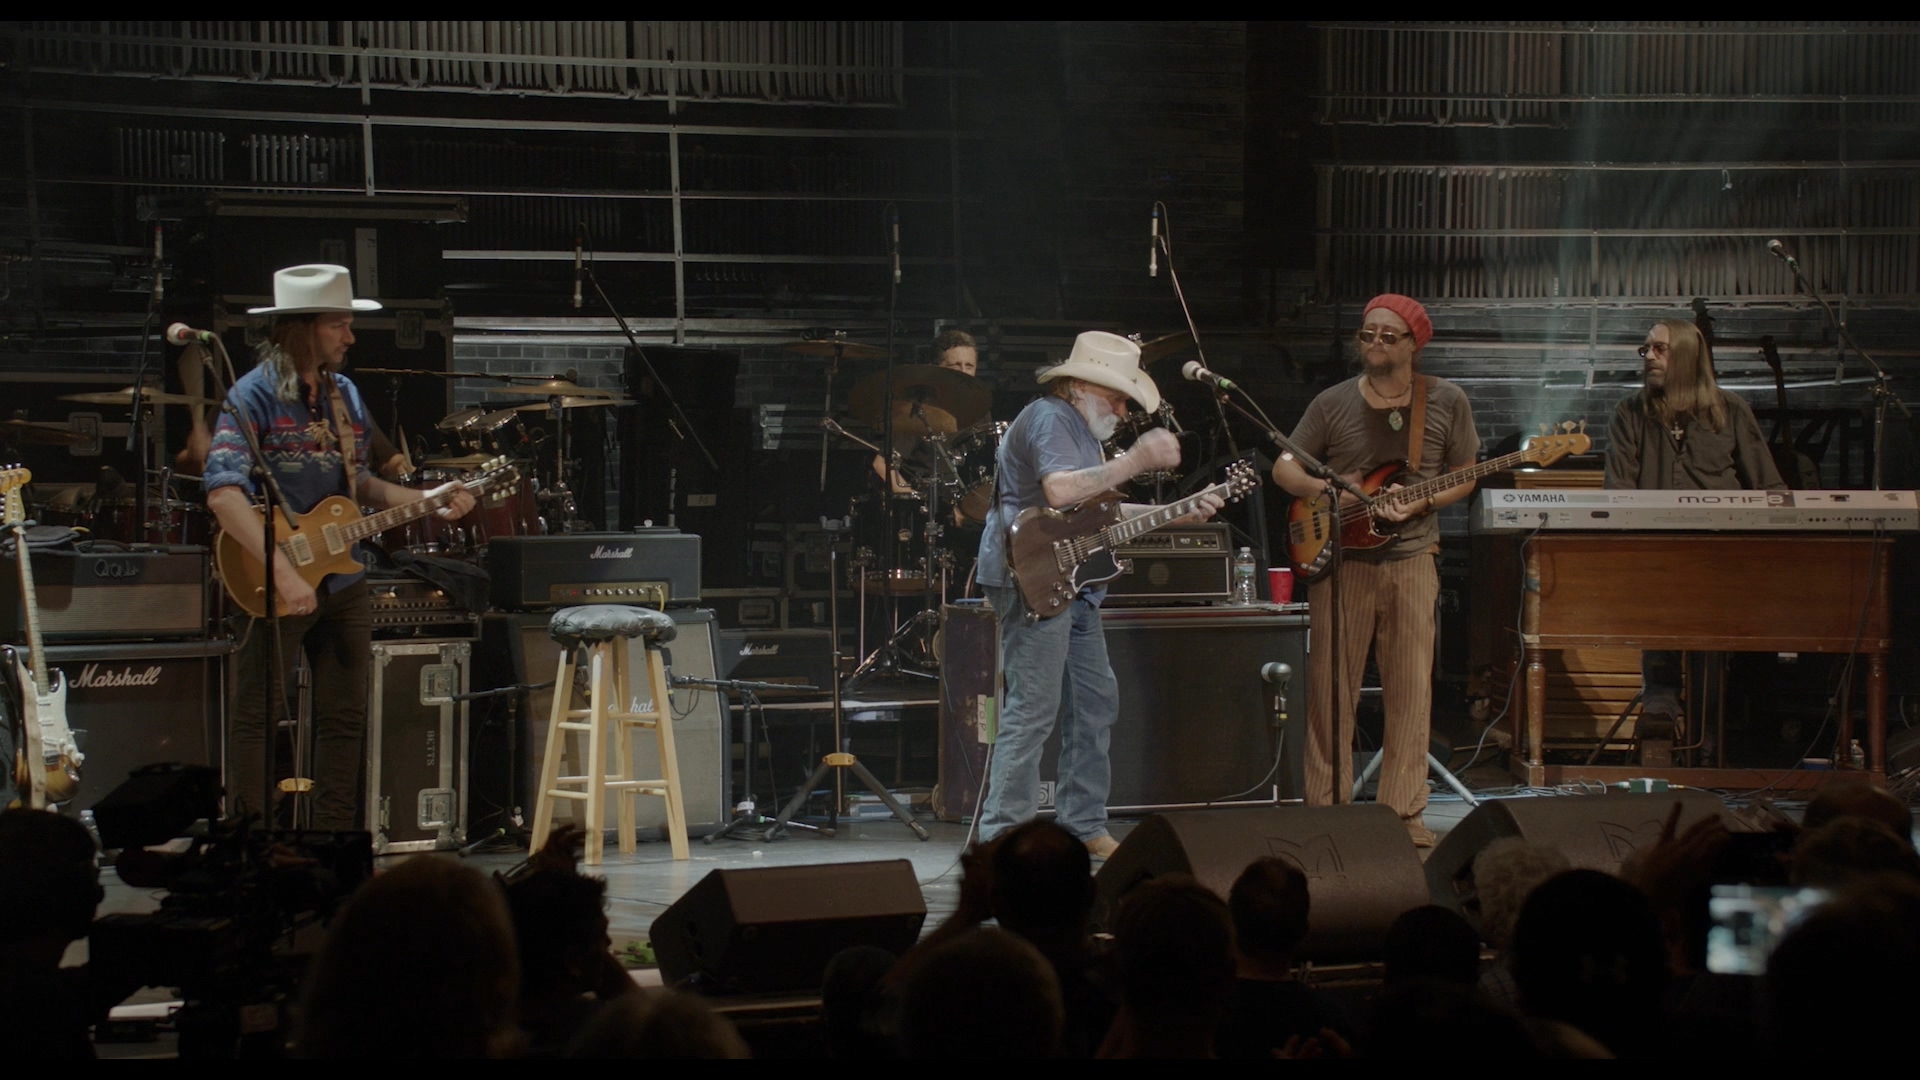 The Dickey Betts Band - Ramblin' Man - Live At The St. George Theatre BD (2019)_20190811_110716.394.jpg